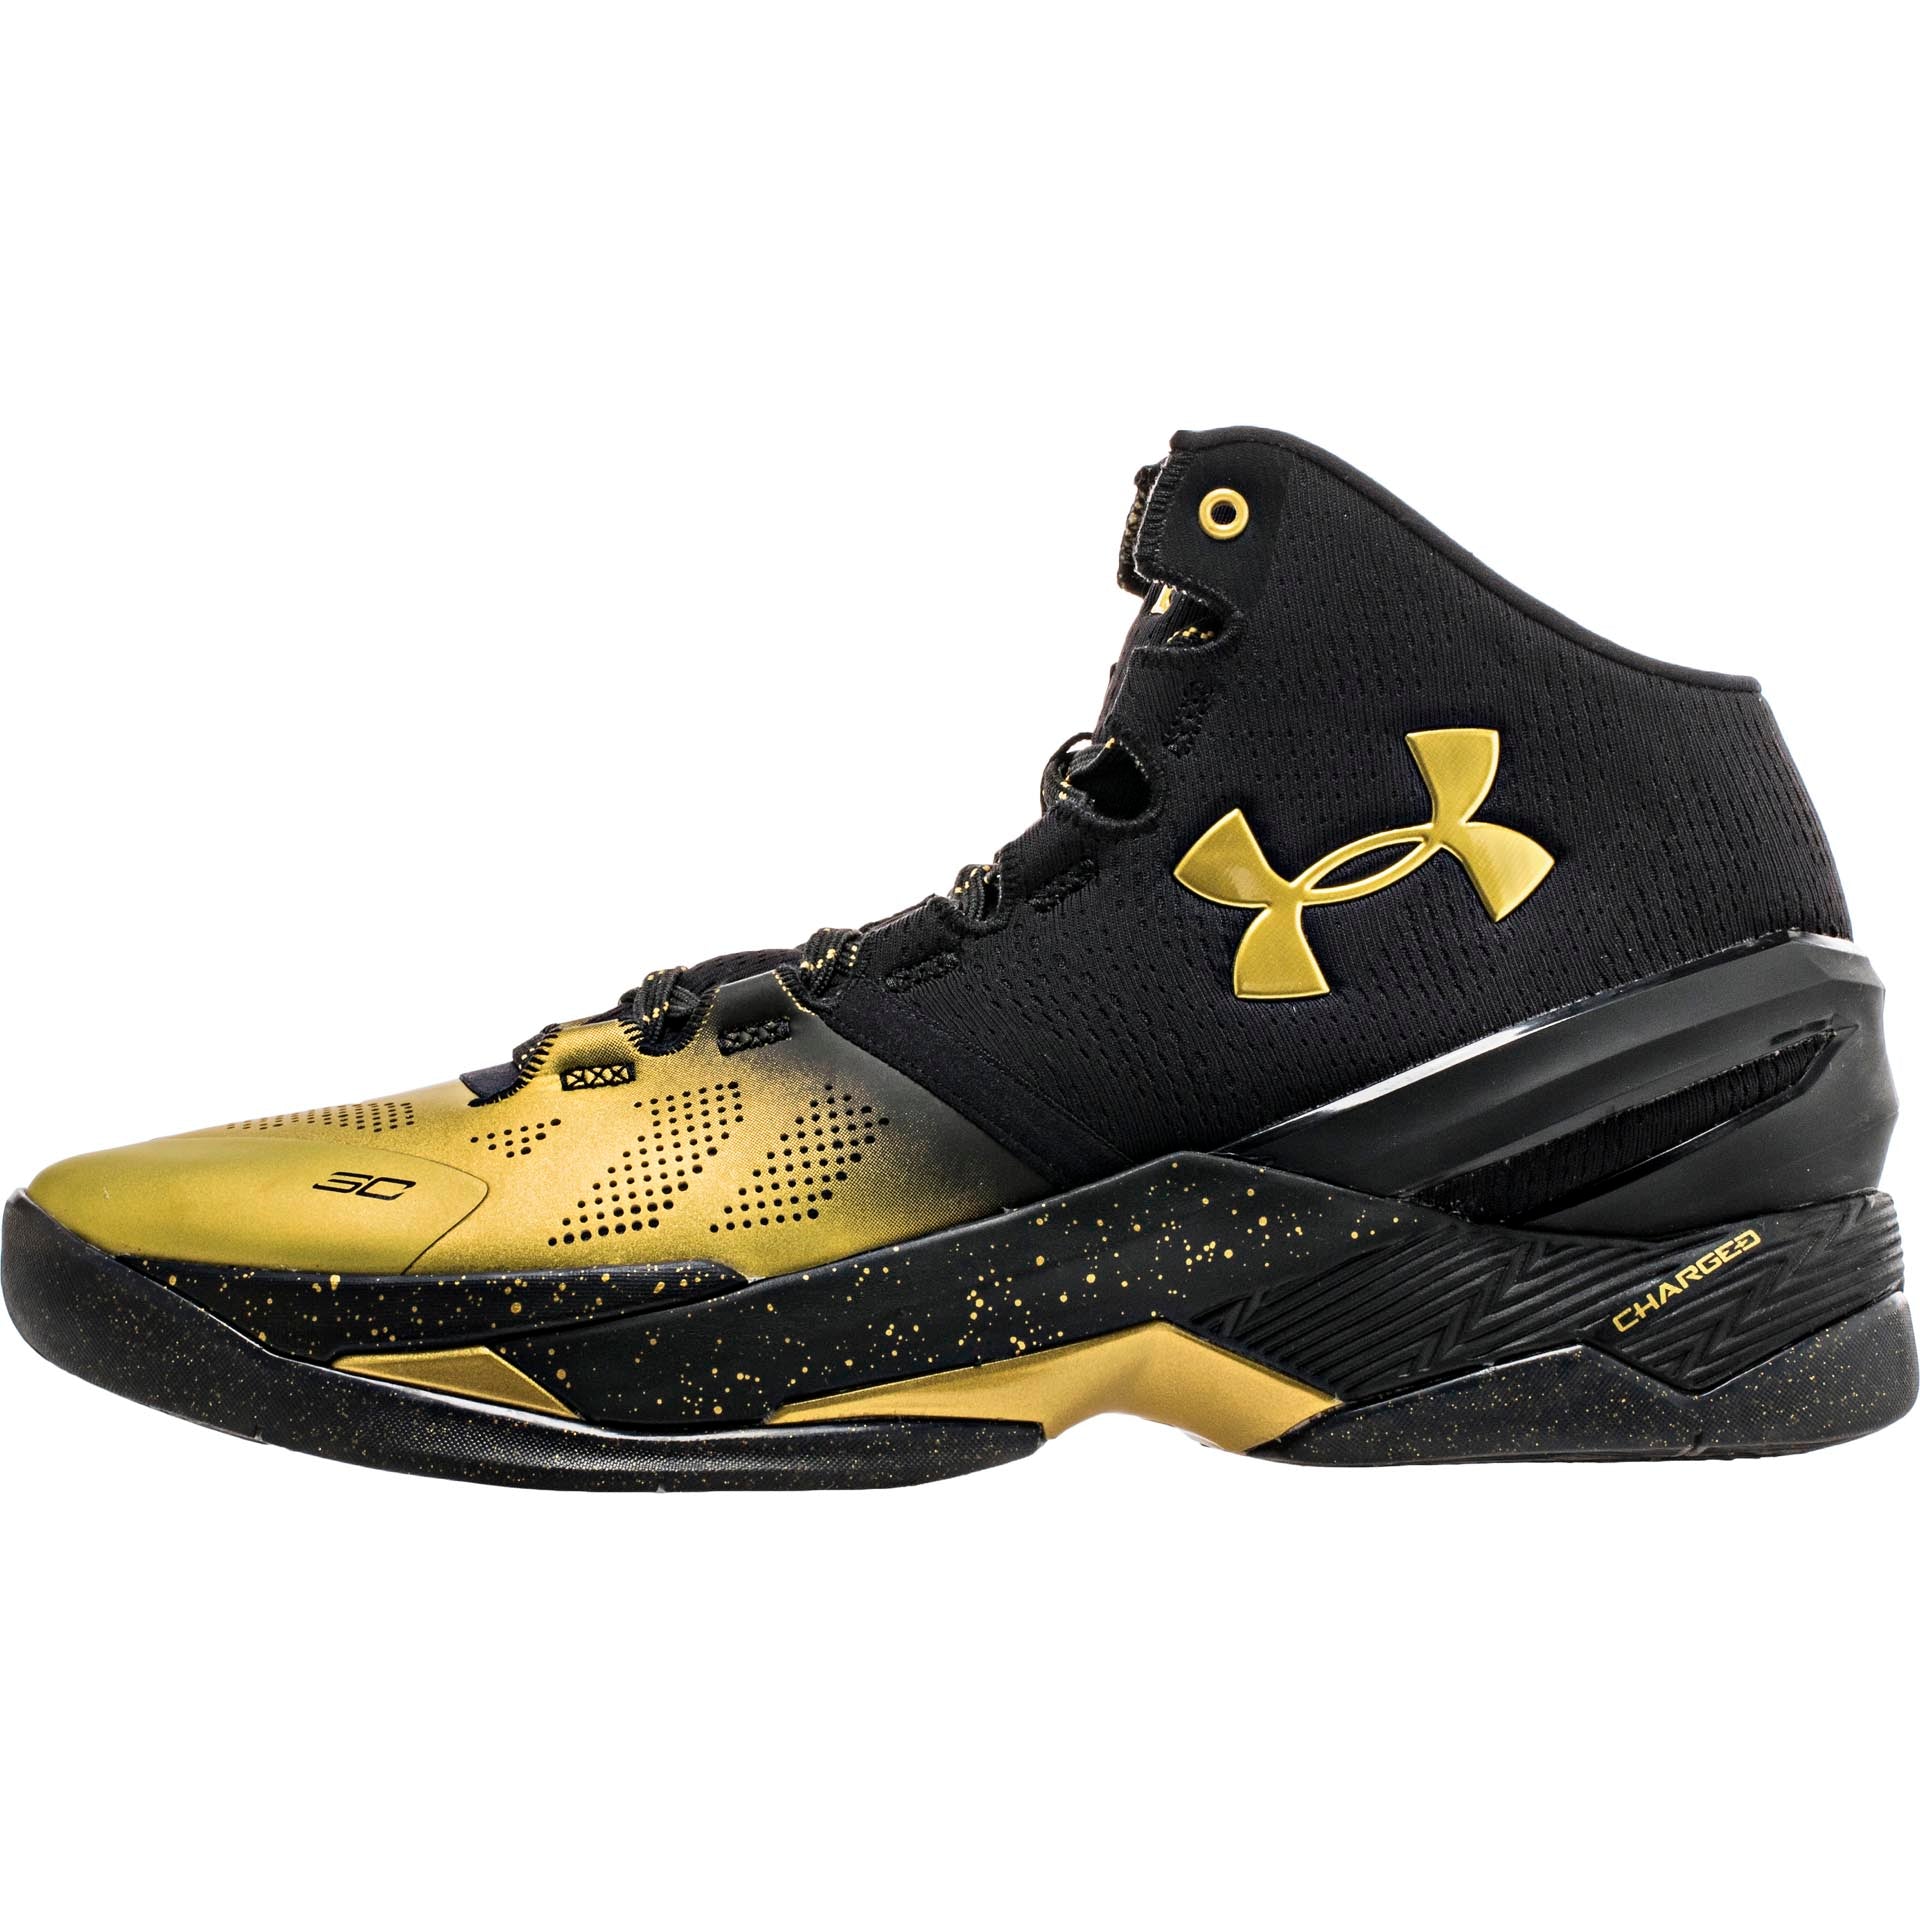 Under Armour Curry Back to Back MVP Pack Release Date